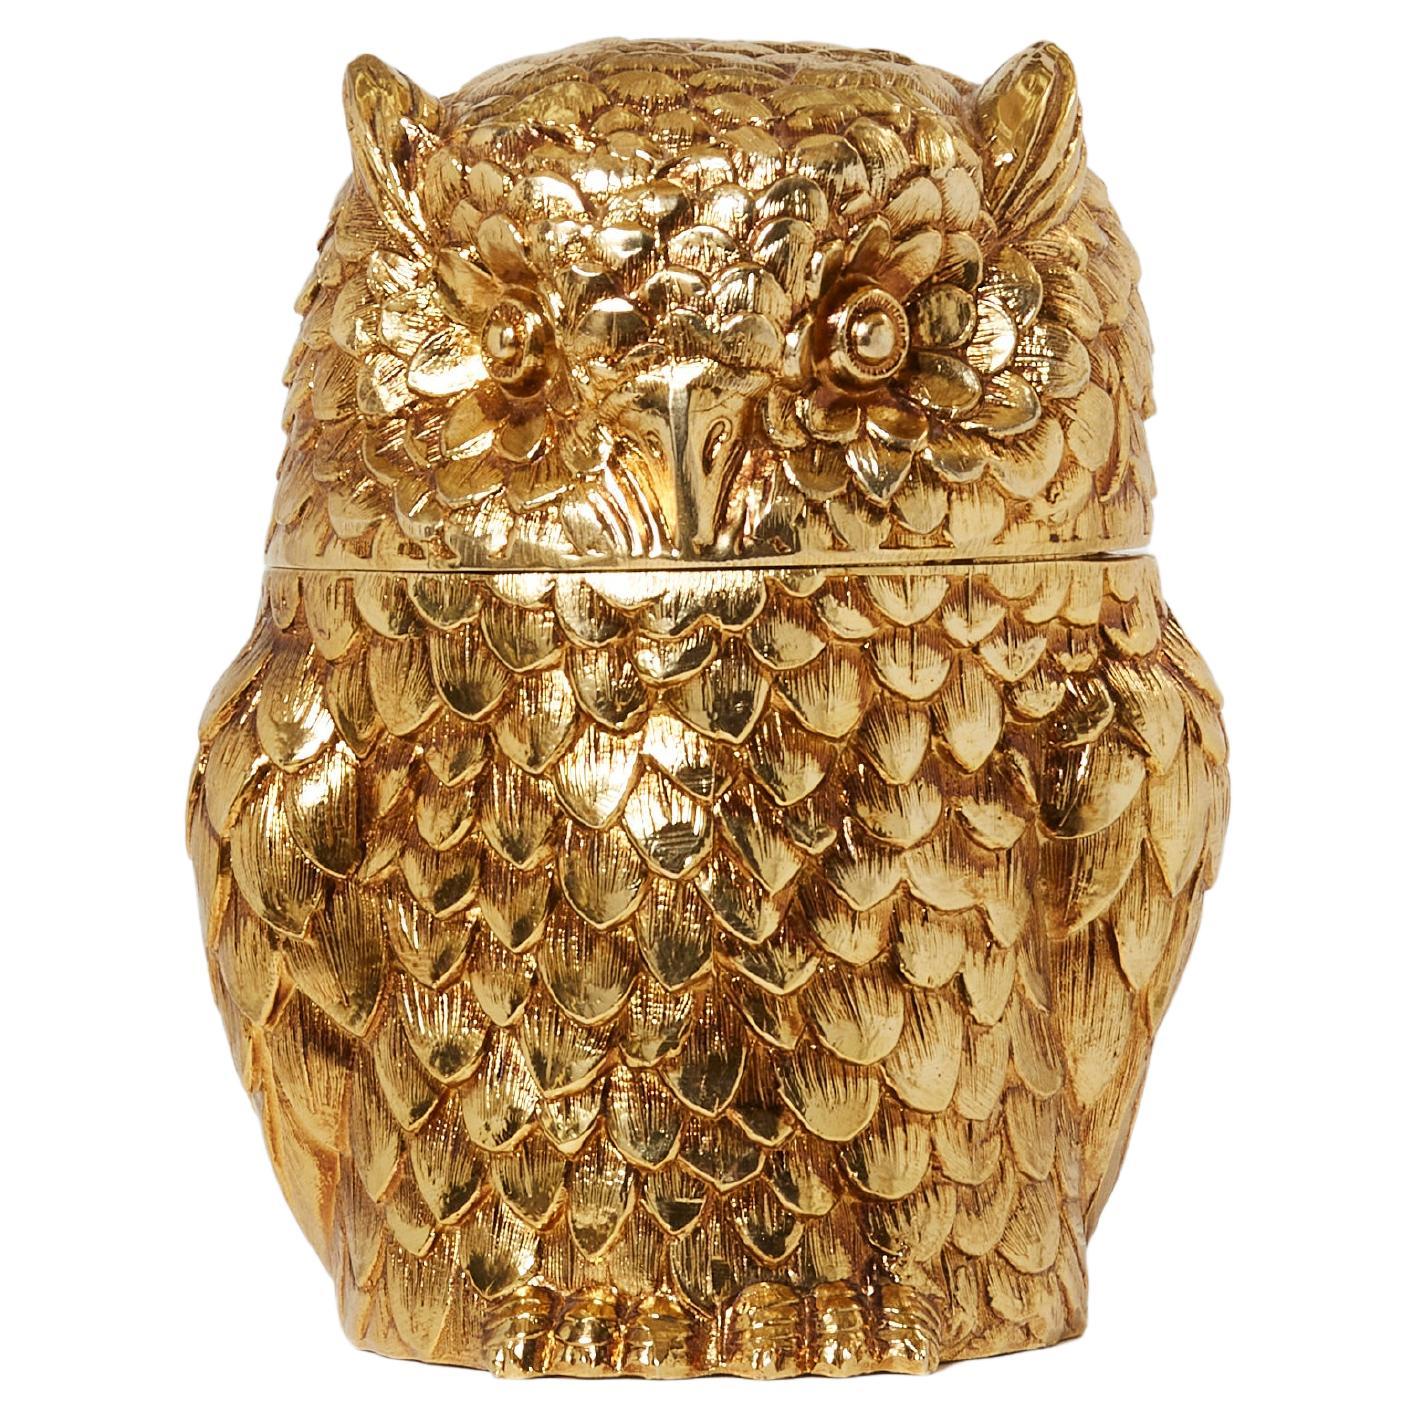 Mauro Manetti Owl Ice Bucket Gilt Plated Italy from 1960